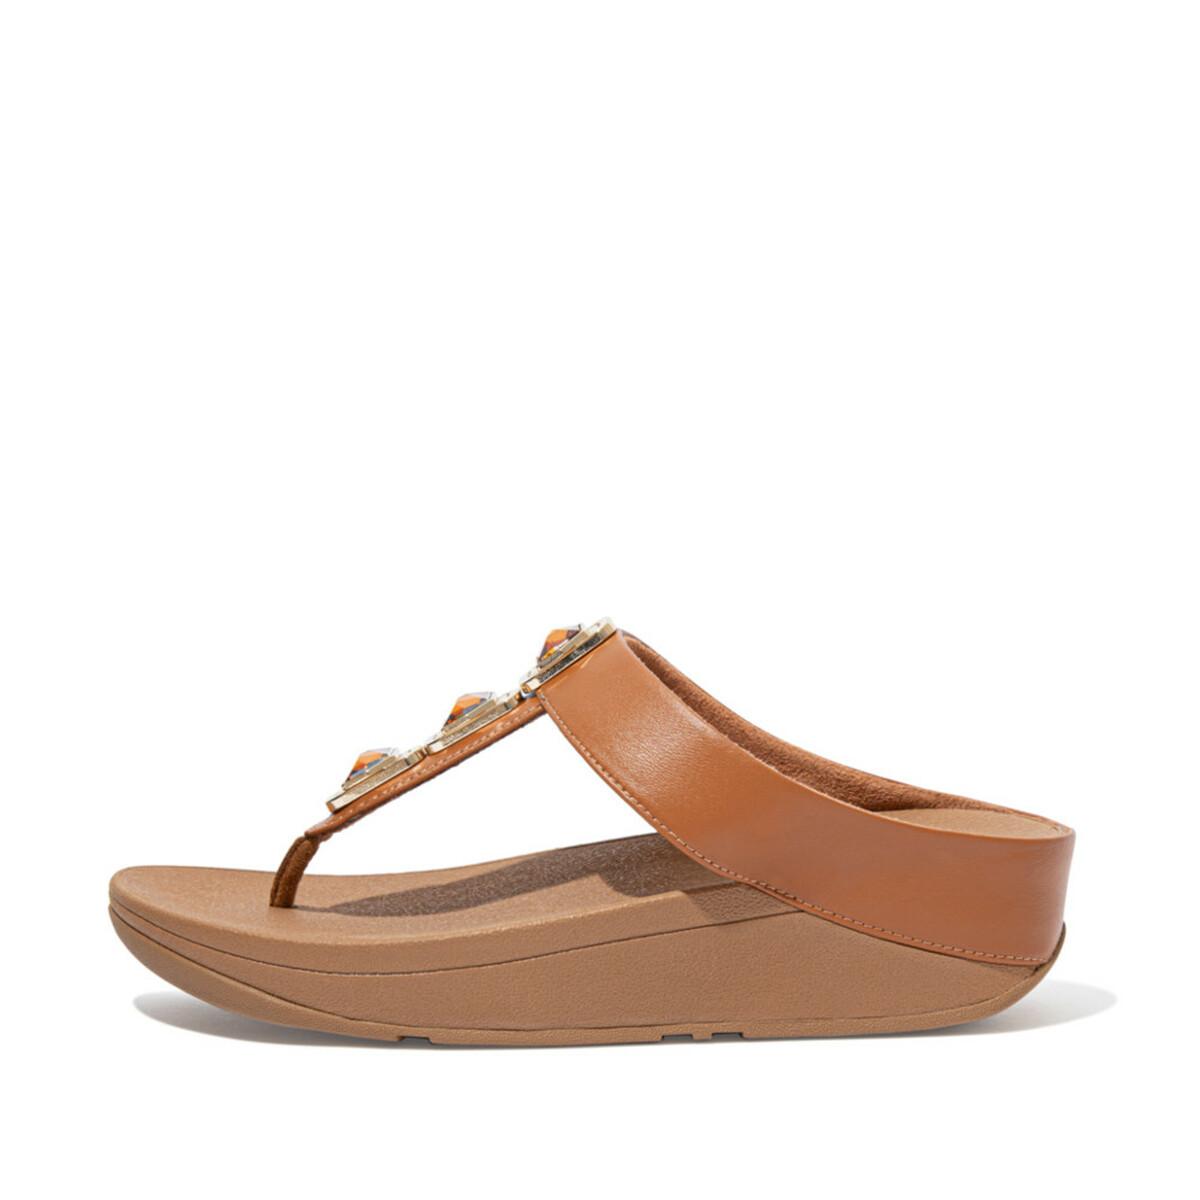 Fitflop Slides Womens India - Fitflop Sandals Sale Online